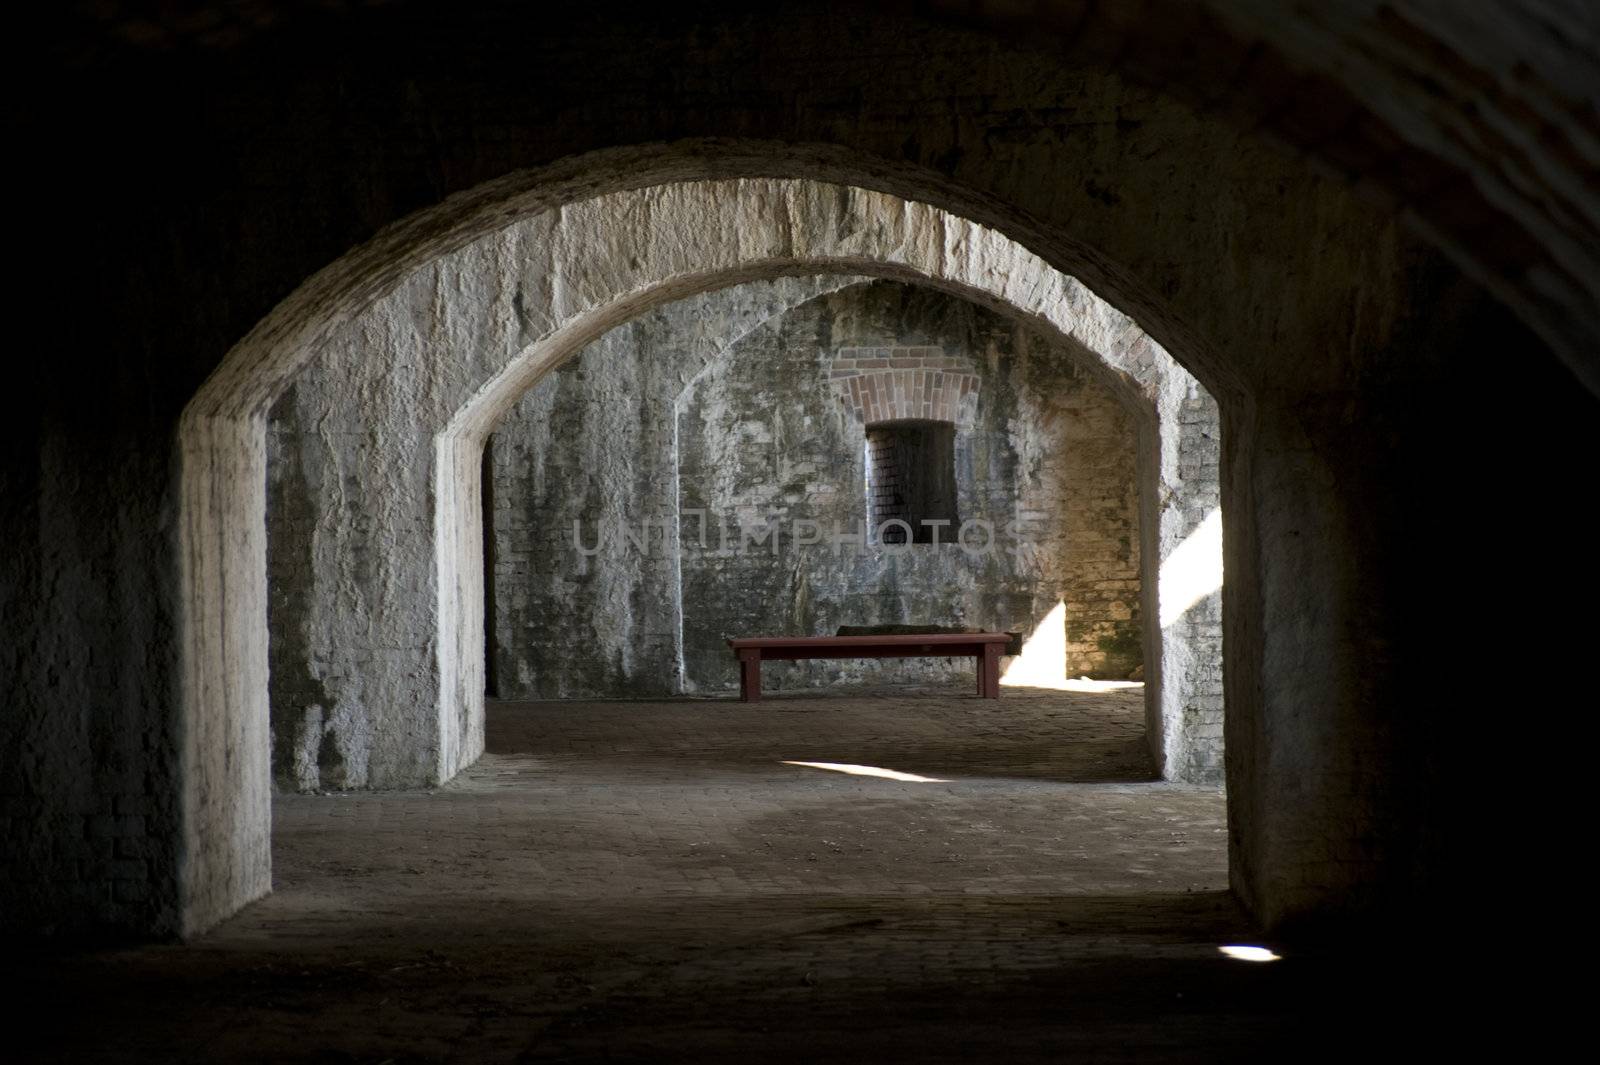 Casements in a civil war fort, where the cannons were aimed loaded from.  (Fort Pickens,  Gulf Islands National Seashore)